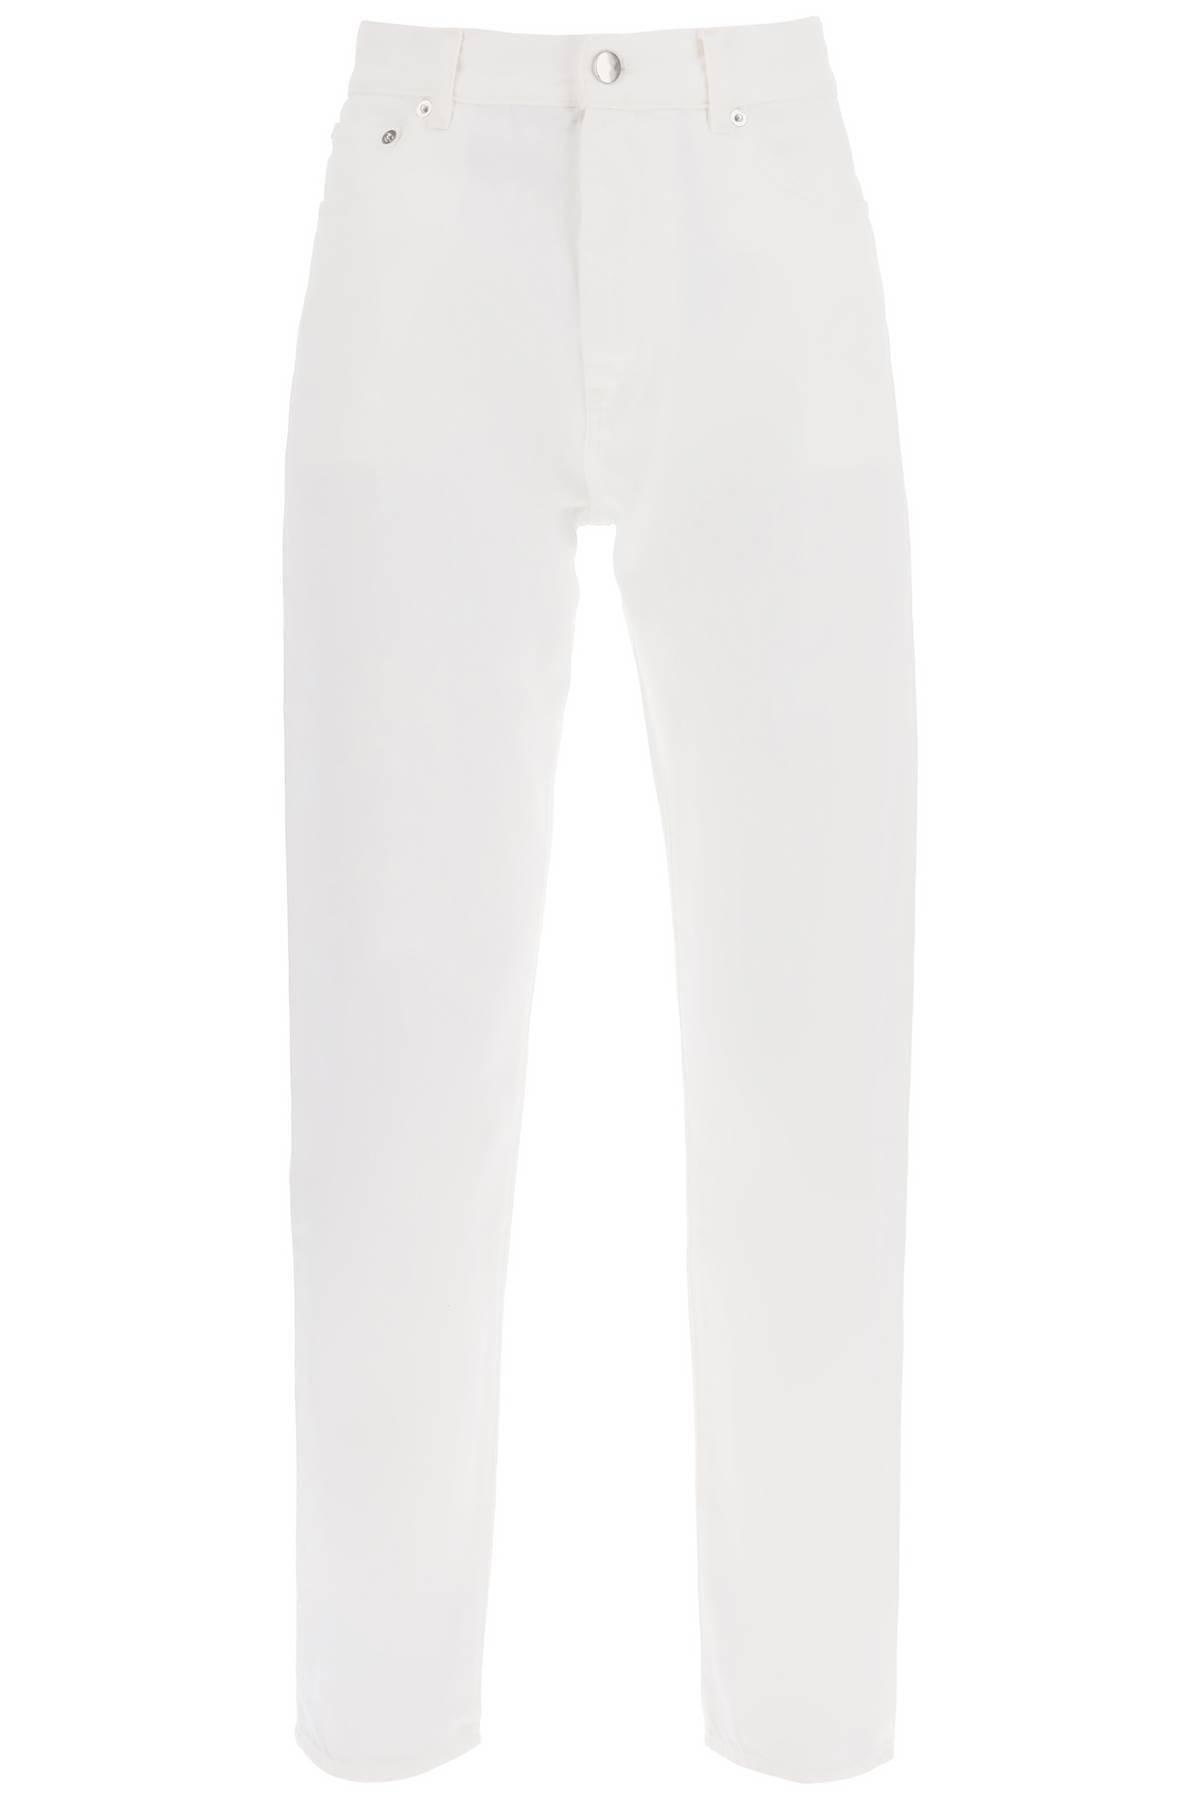 LOULOU STUDIO LOULOU STUDIO cropped straight cut jeans